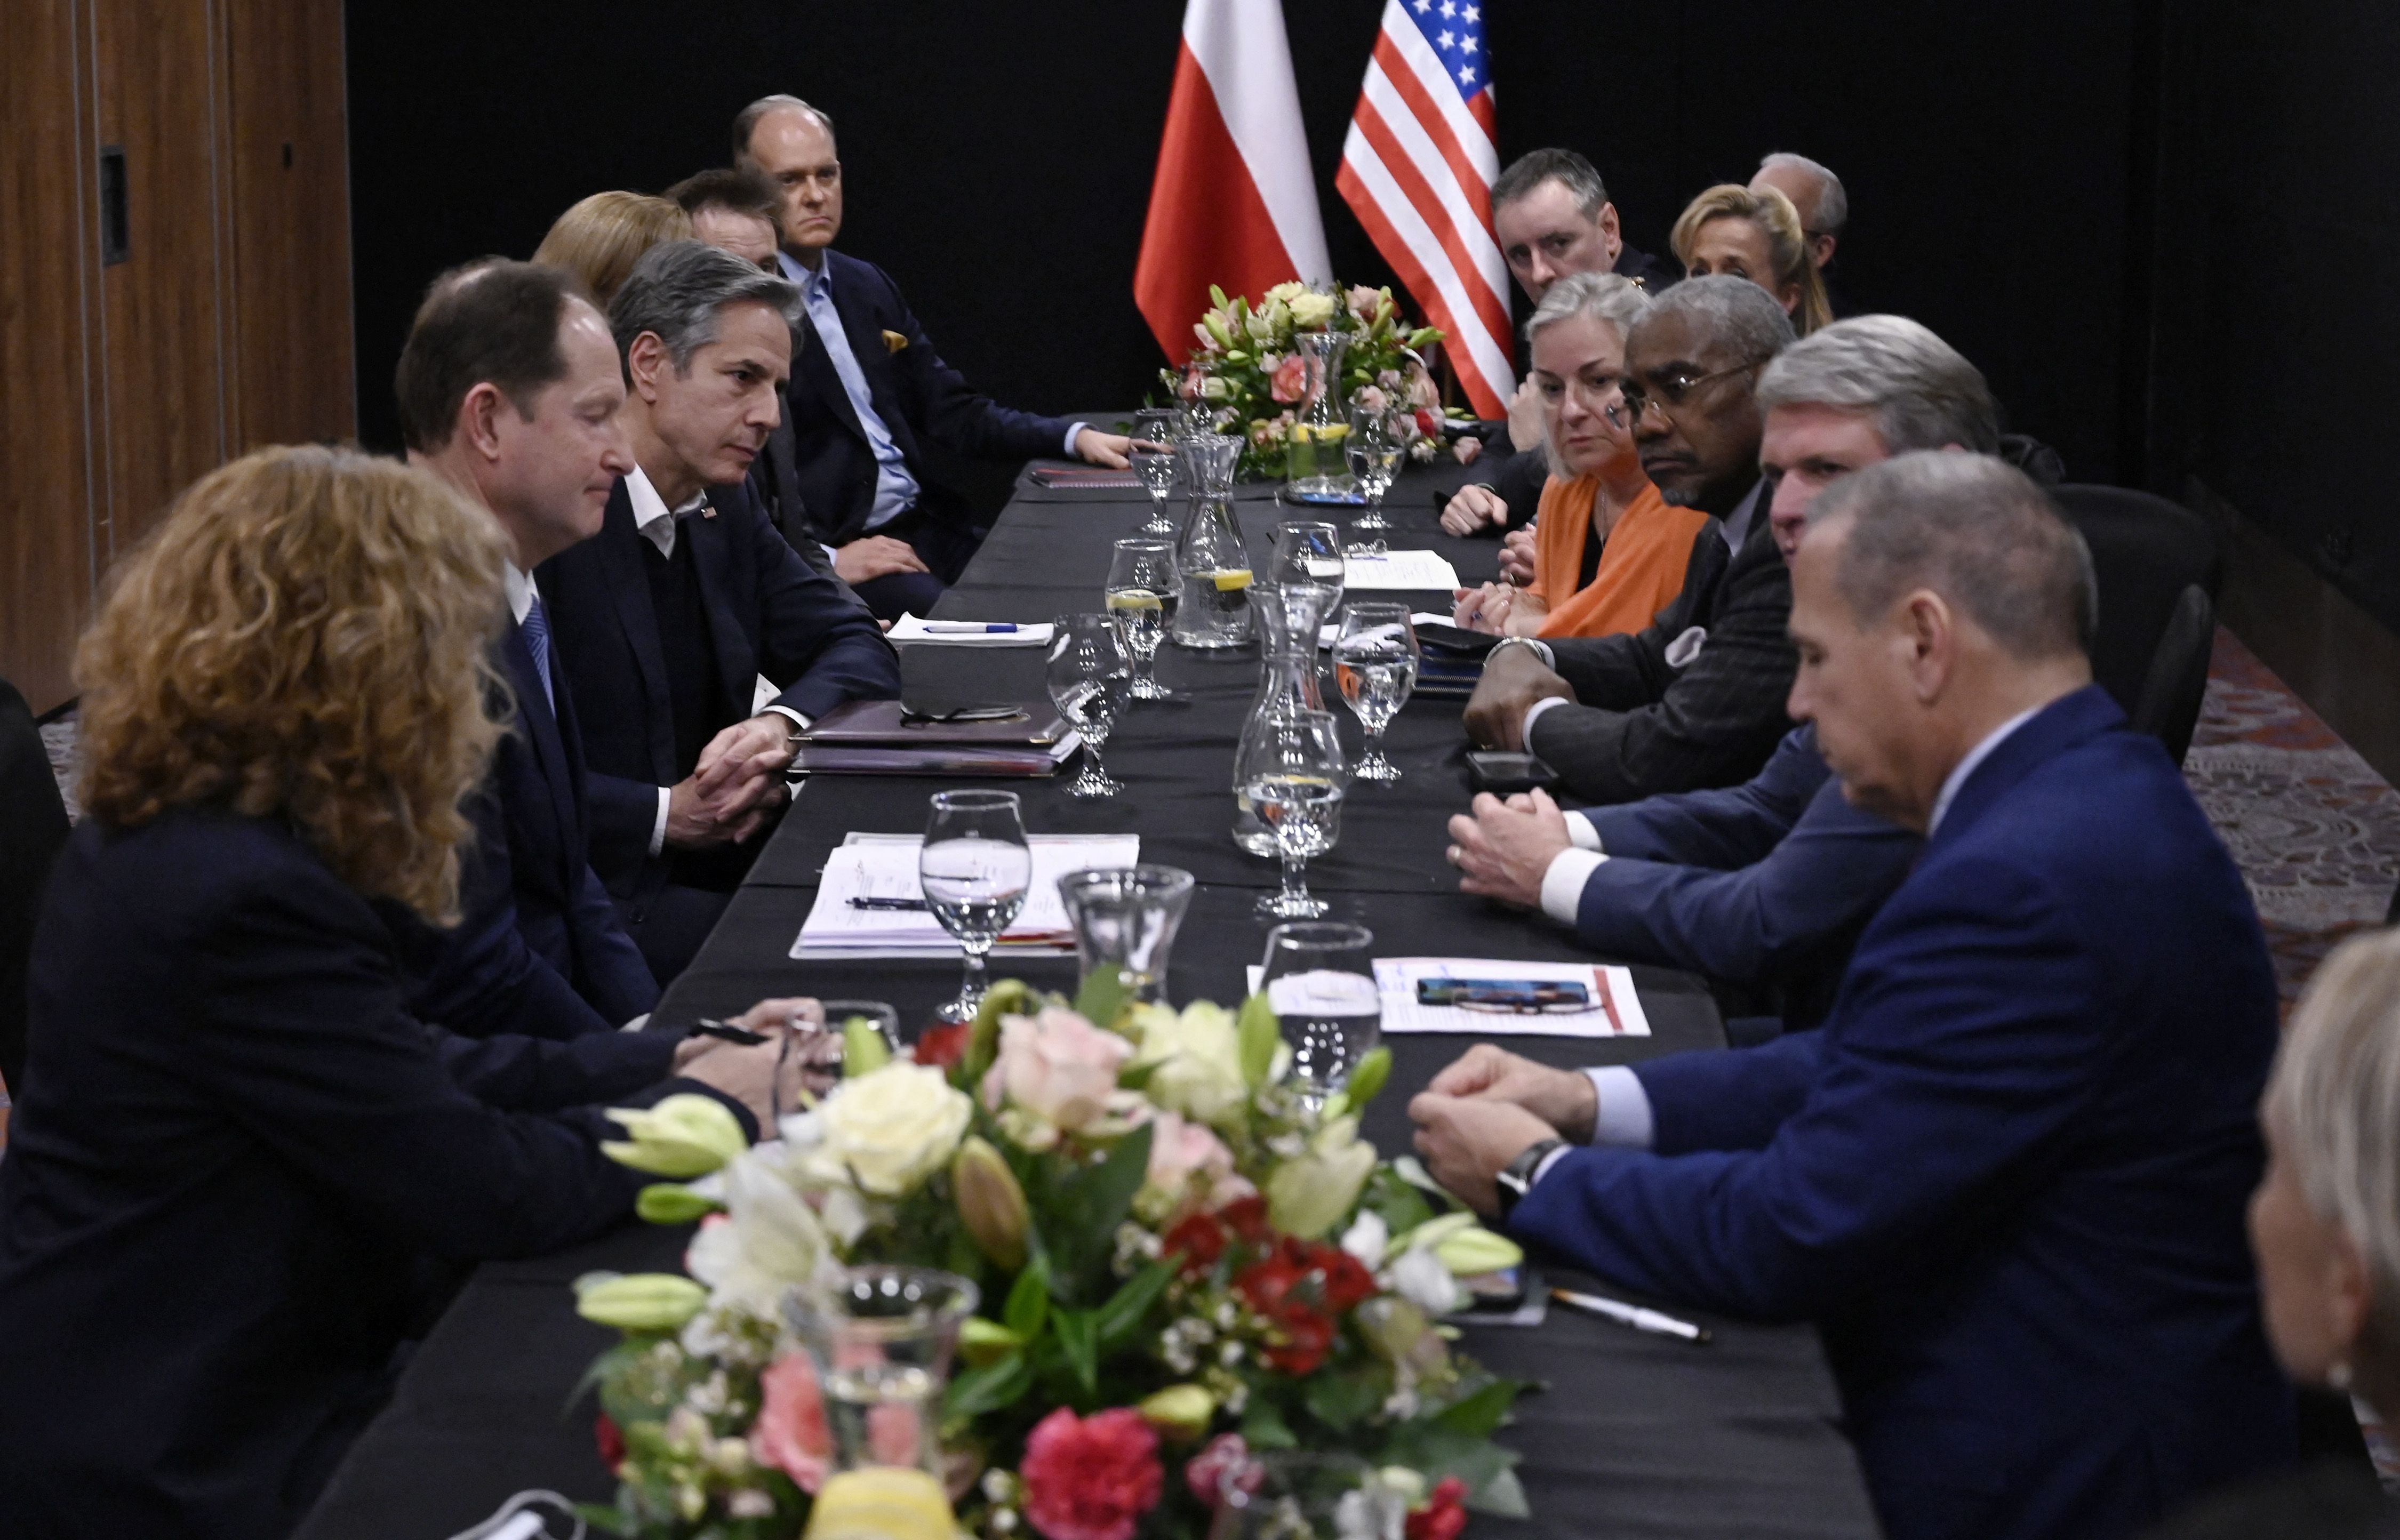 Secretary of State Antony Blinken (3rd L) meets with the Congressional delegation of the House Foreign Affairs Committee in Rzeszów, Poland on March 5, 2022